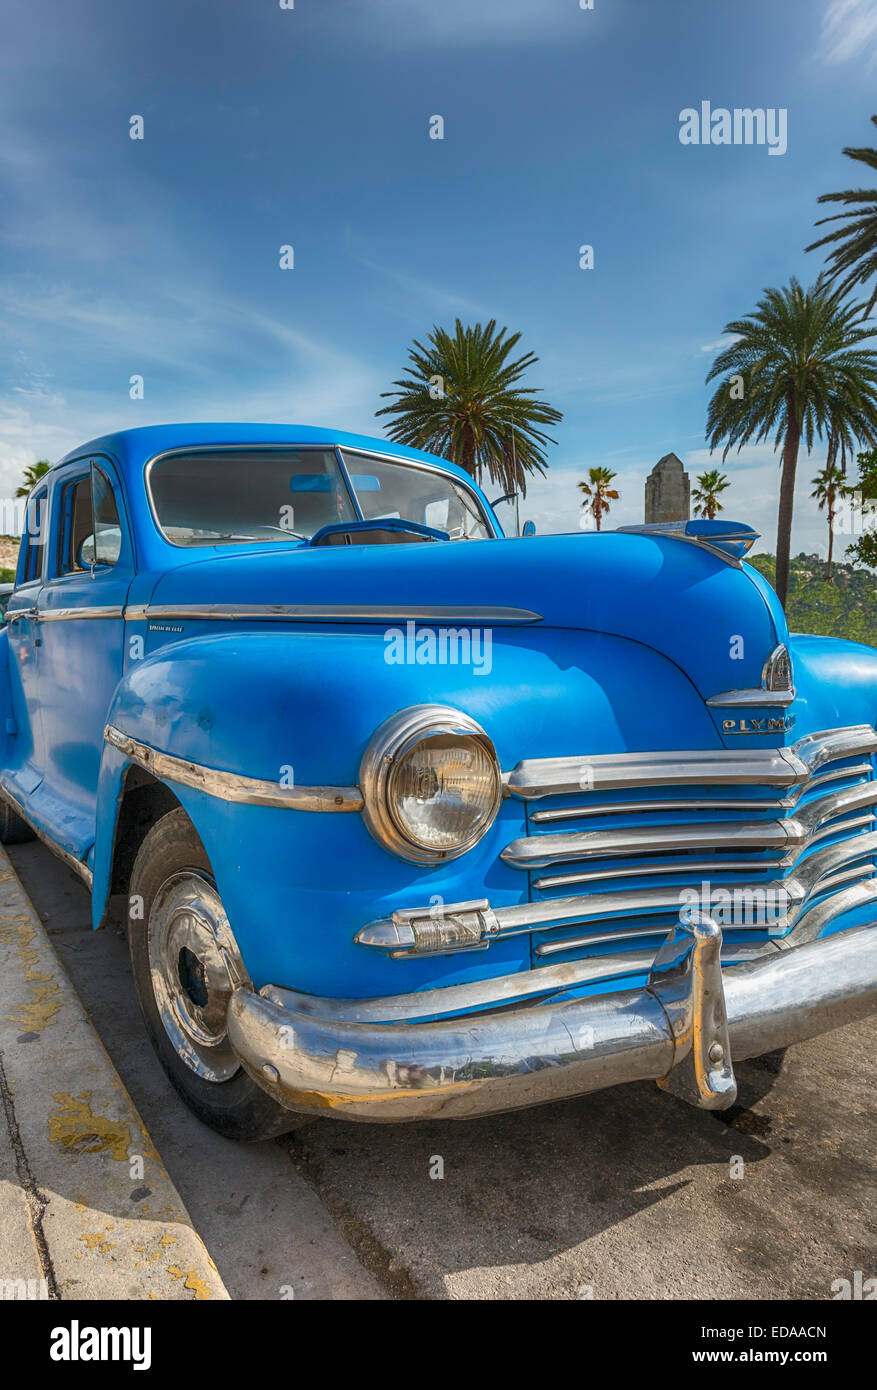 A low front shot of a bright blue antique car on the street in Cuba. Stock Photo